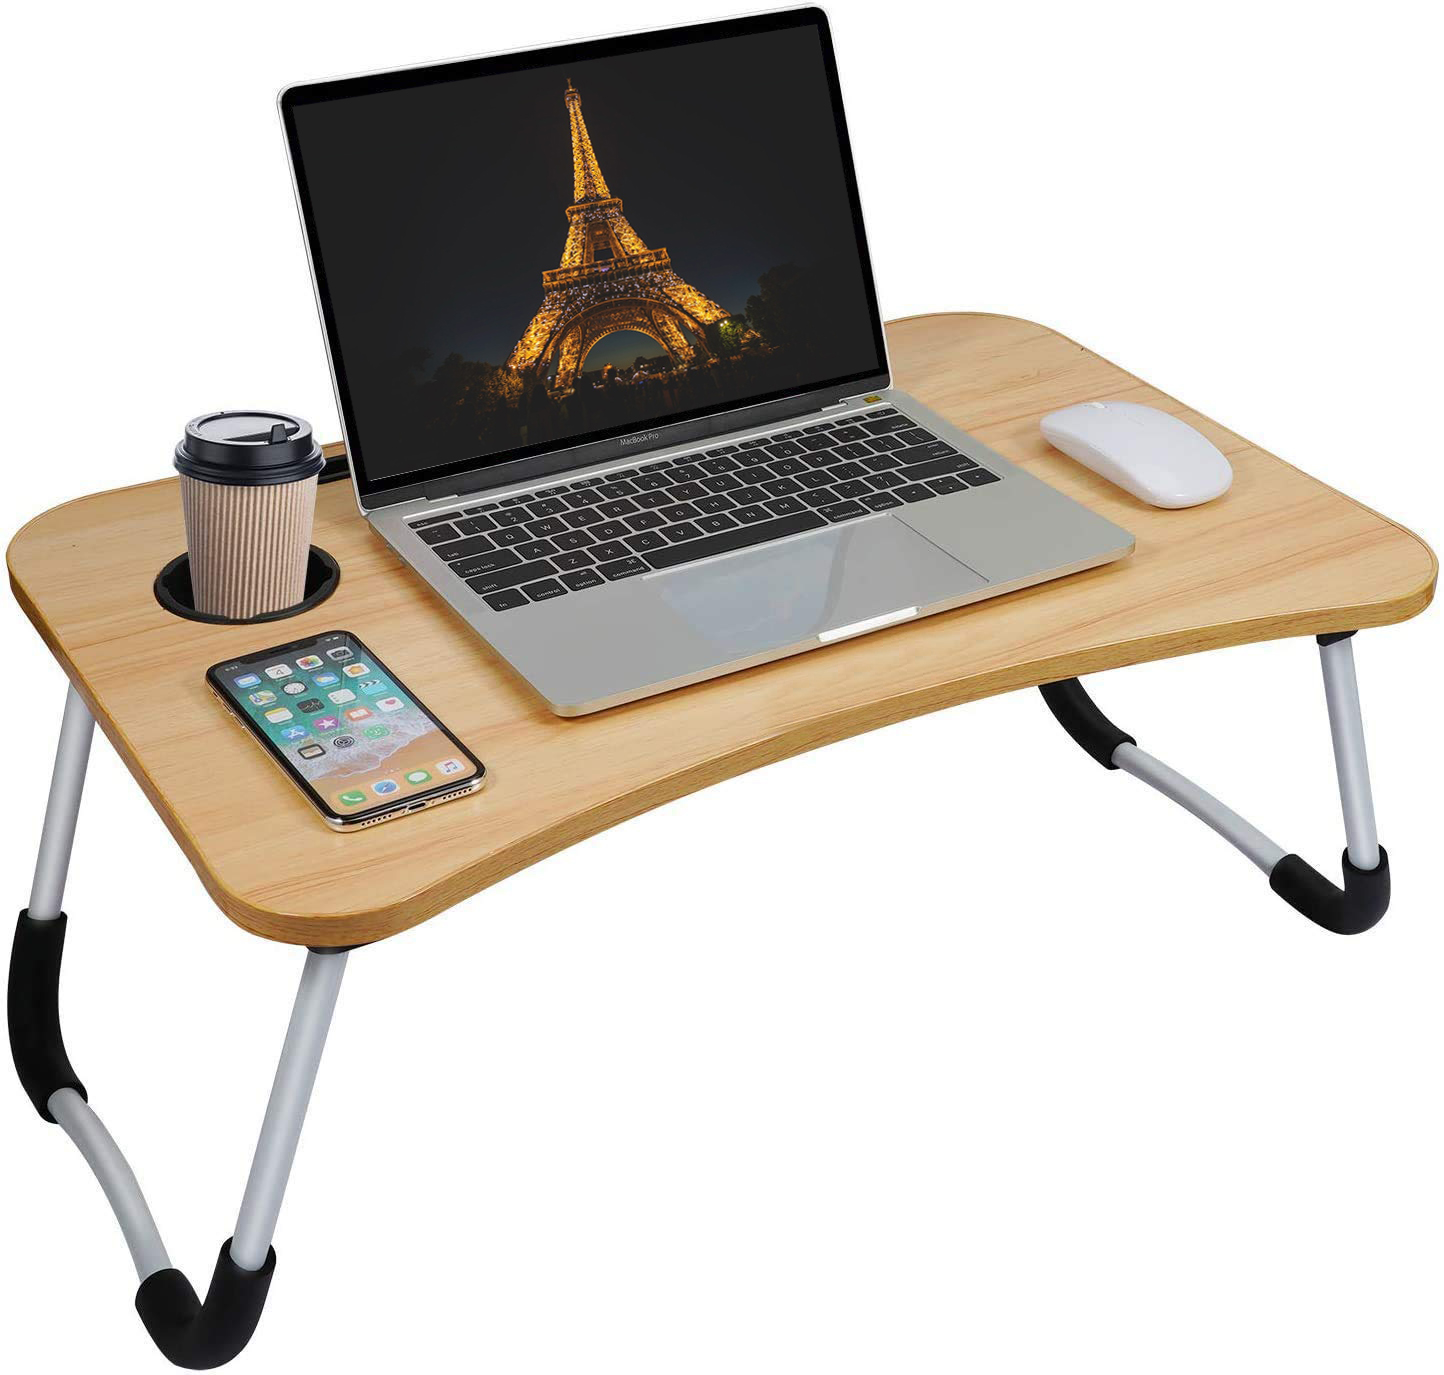 Kumaka Multipurpose Foldable Laptop Table with Cup Holder (Multi-Color)